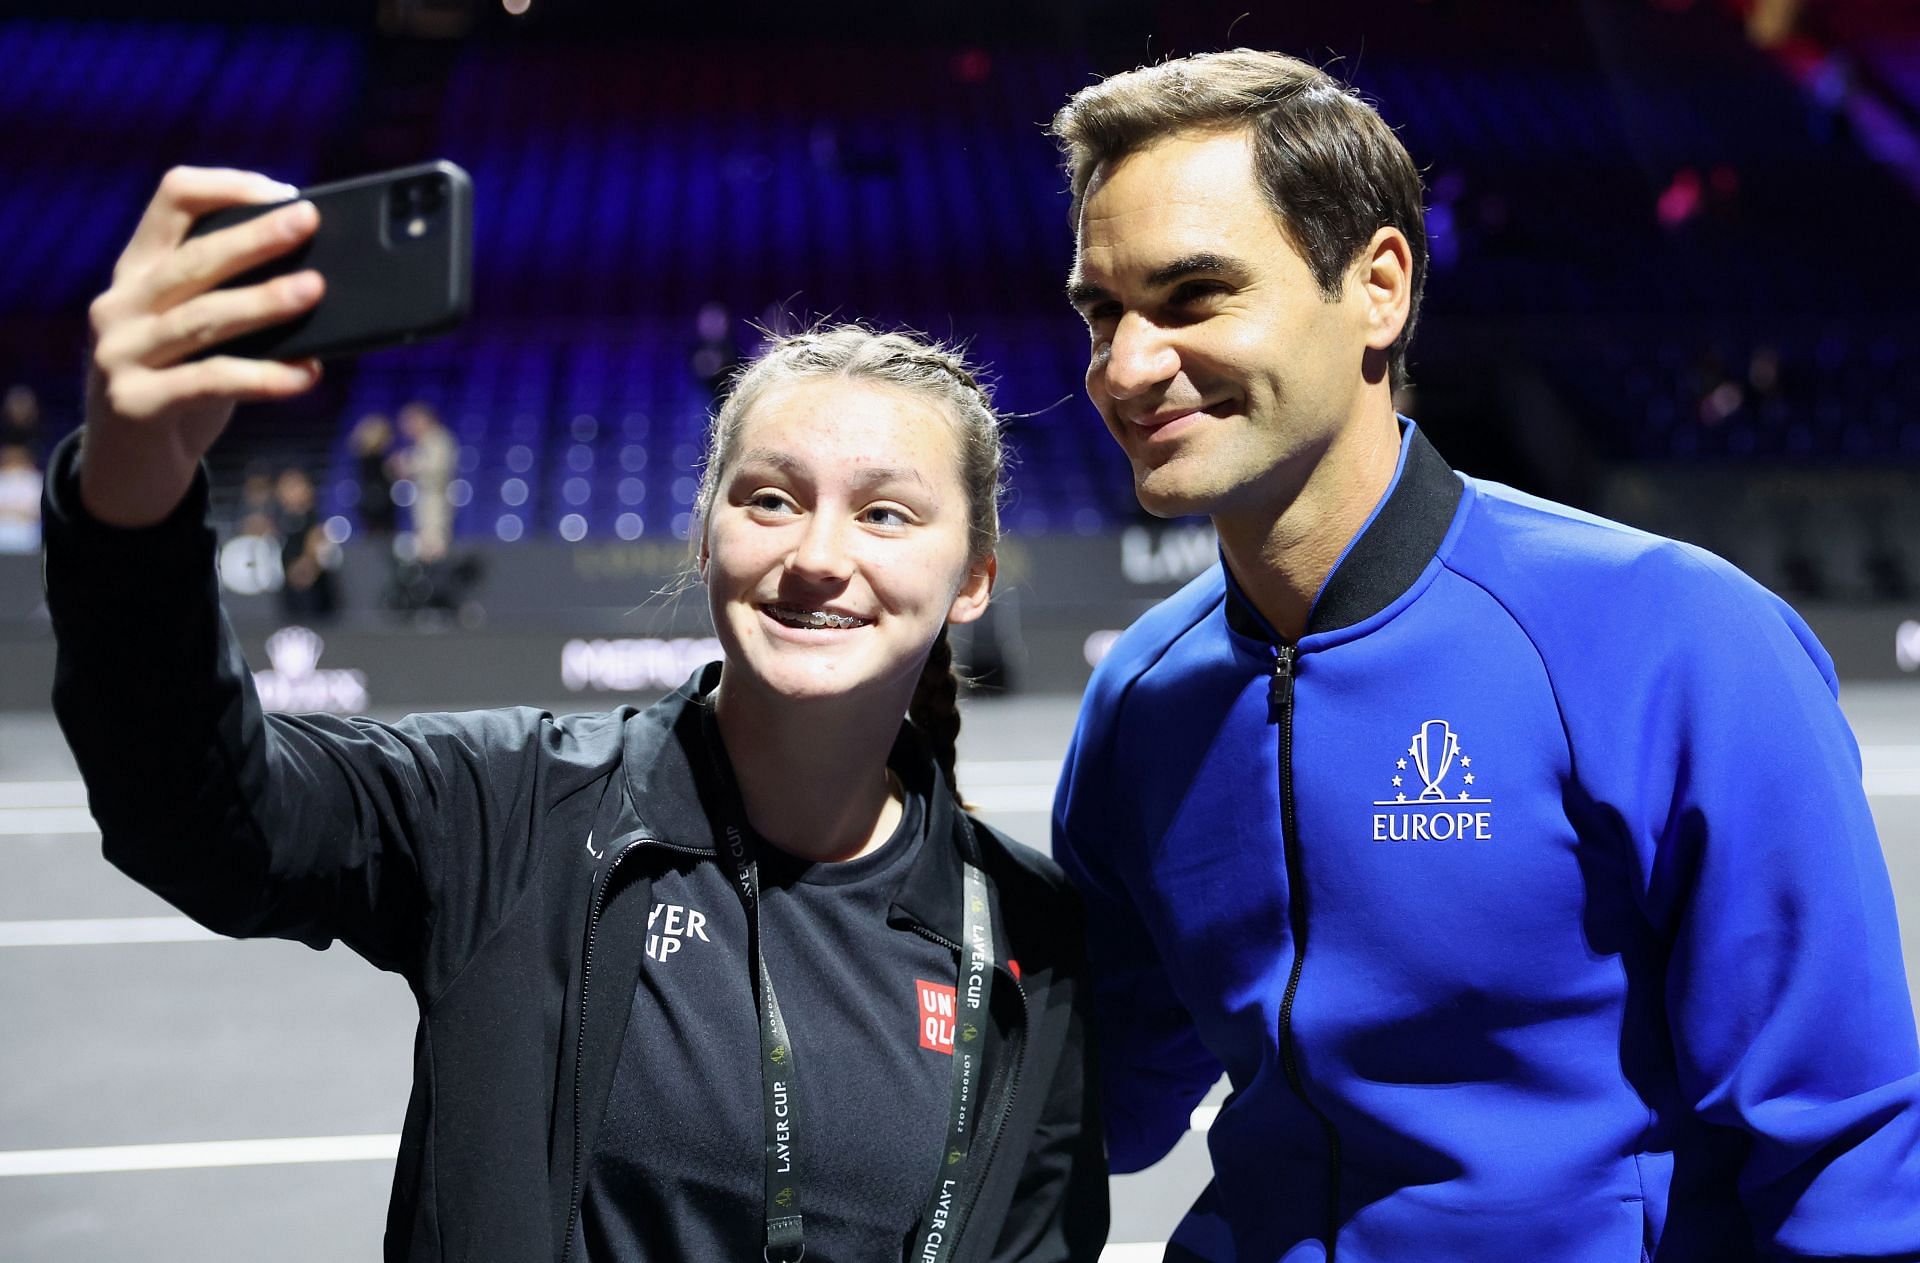 Roger Federer (right) at the 2022 Laver Cup in London.